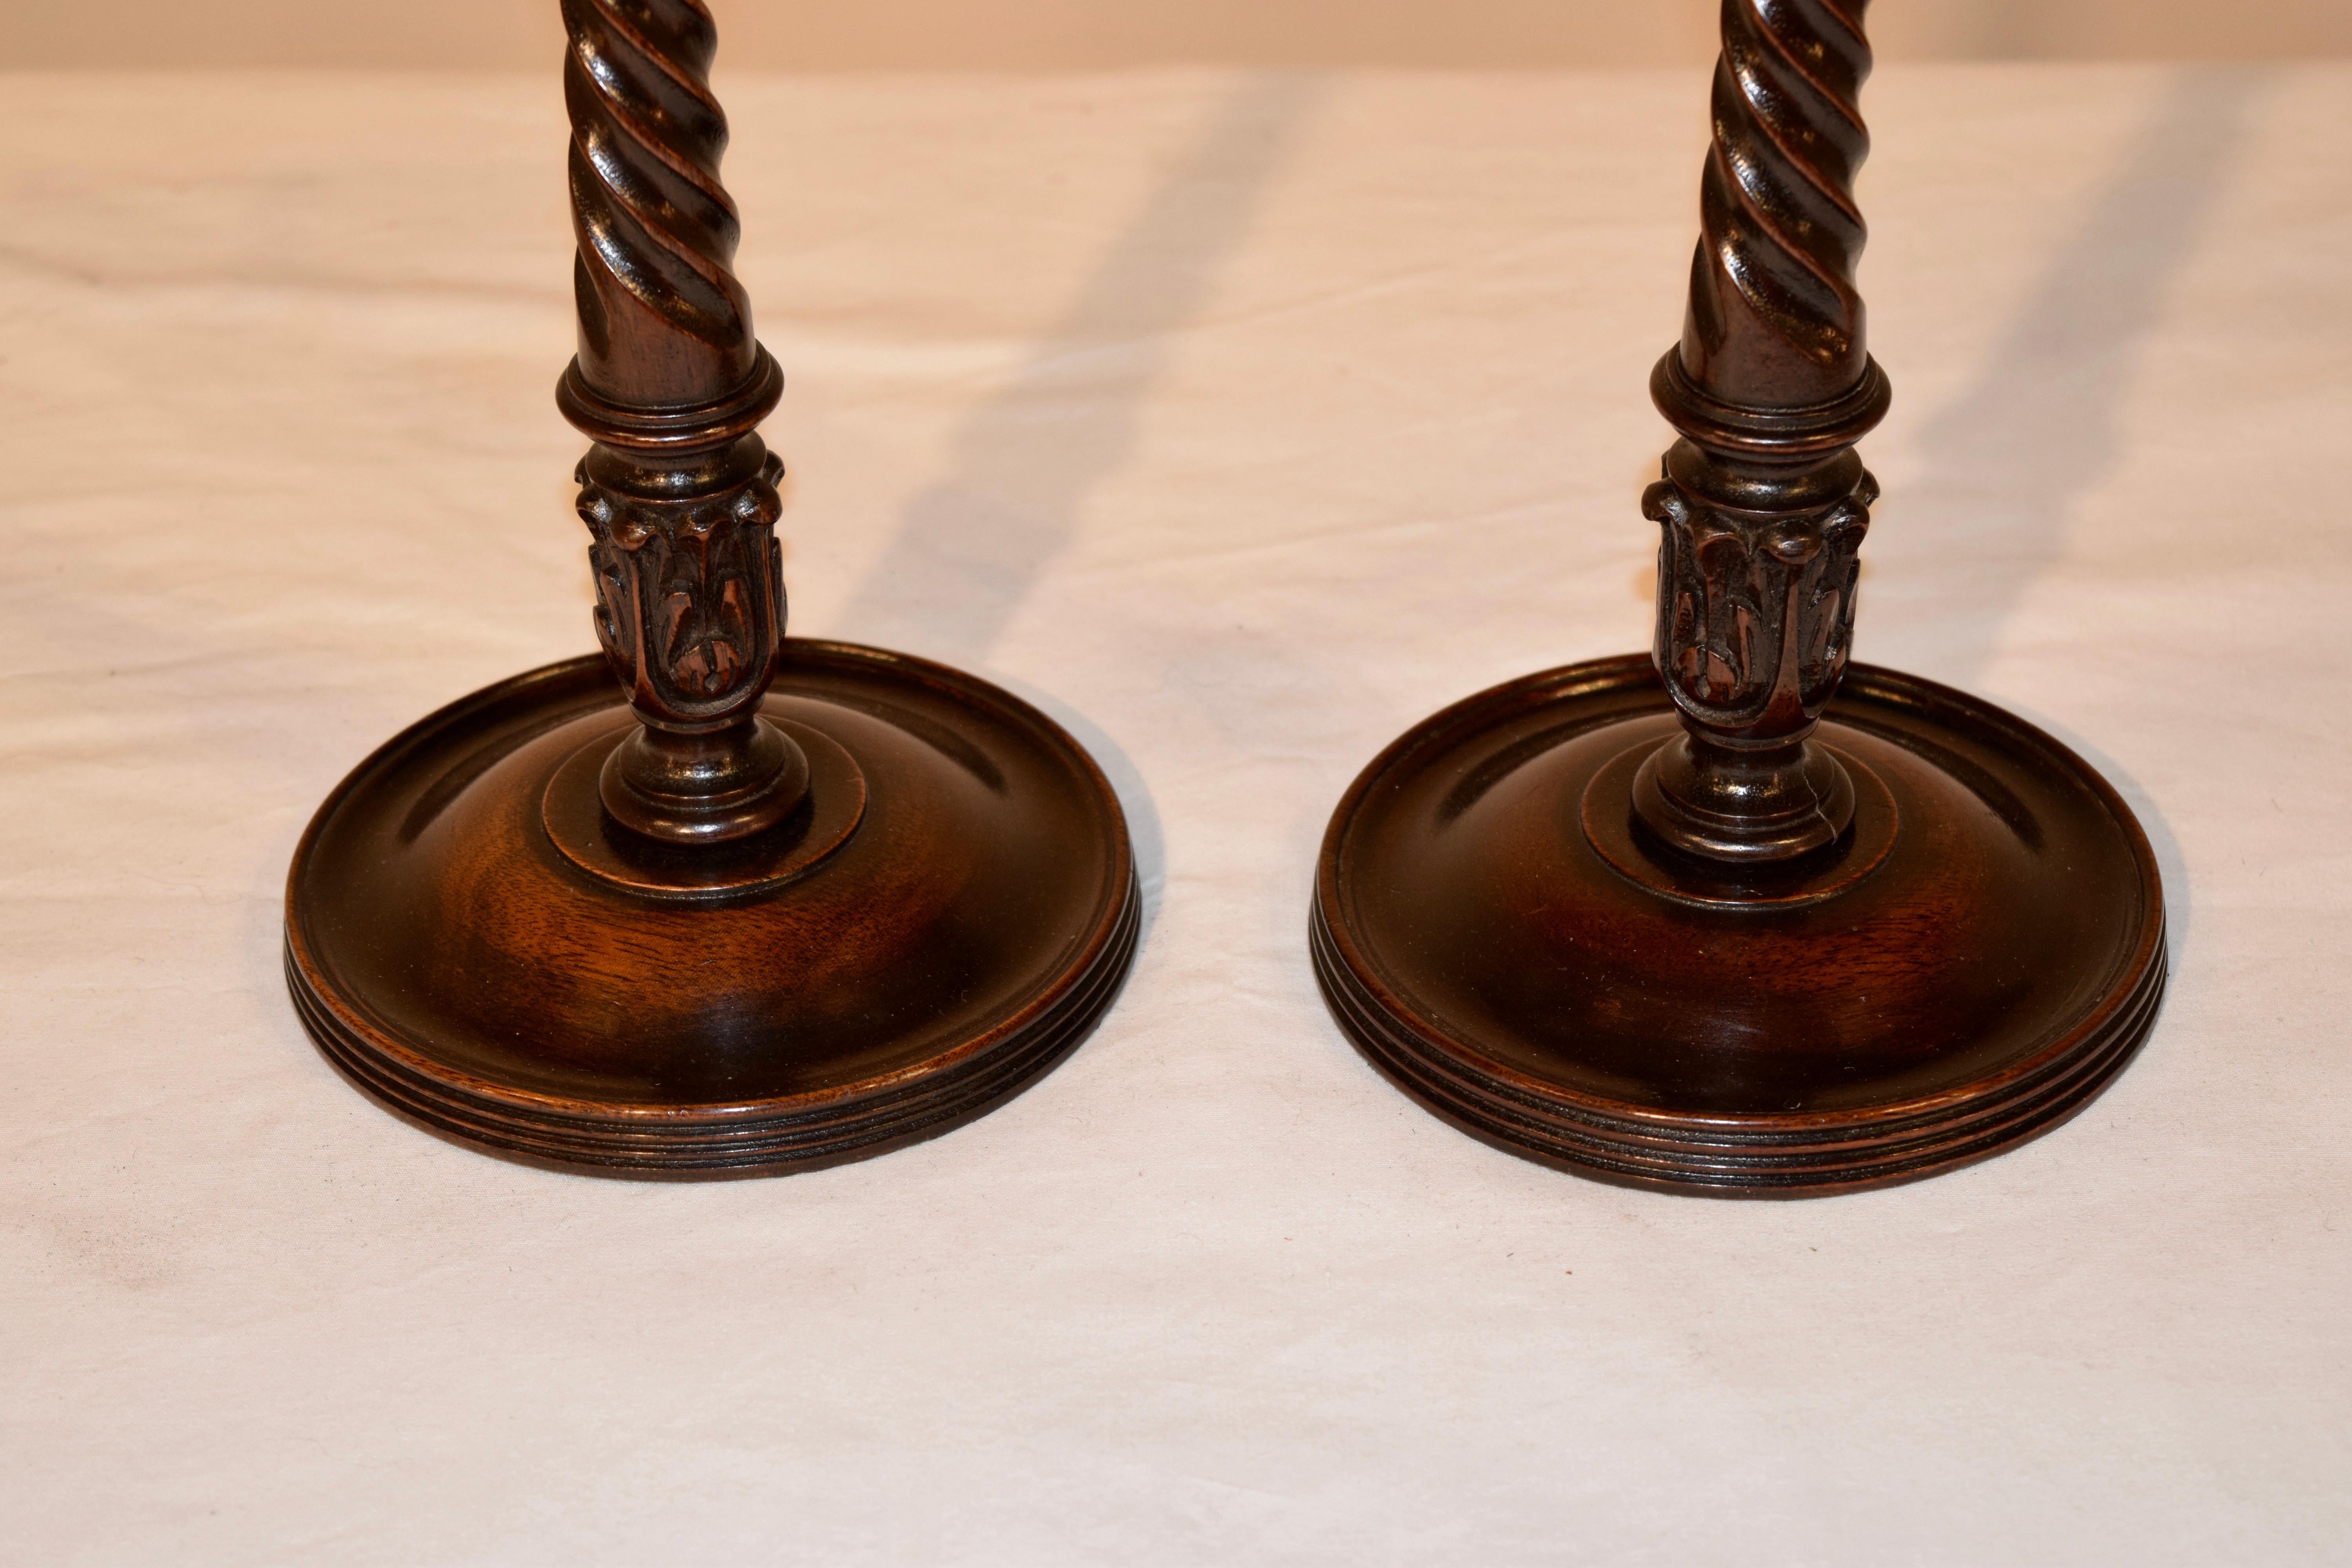 Turned Pair of Exquisite 19th Century Mahogany Candlesticks